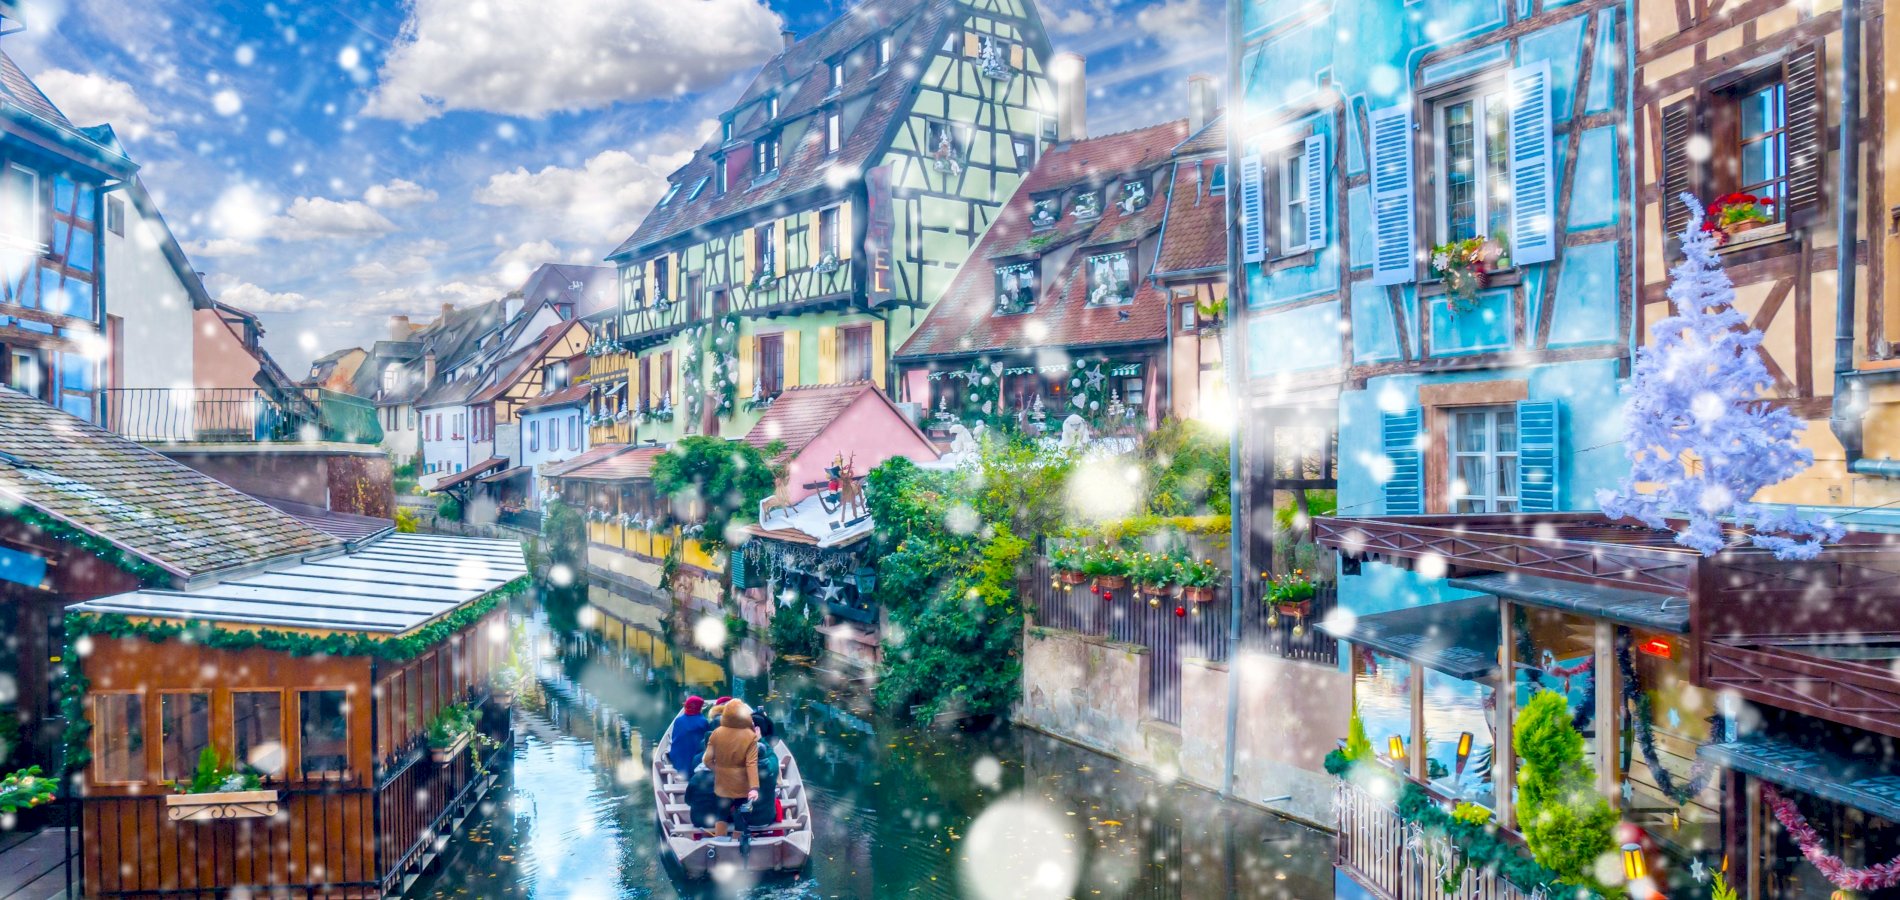 Ophorus Tours - A Private Day Trip from Strasbourg to Christmas Markets of Alsace